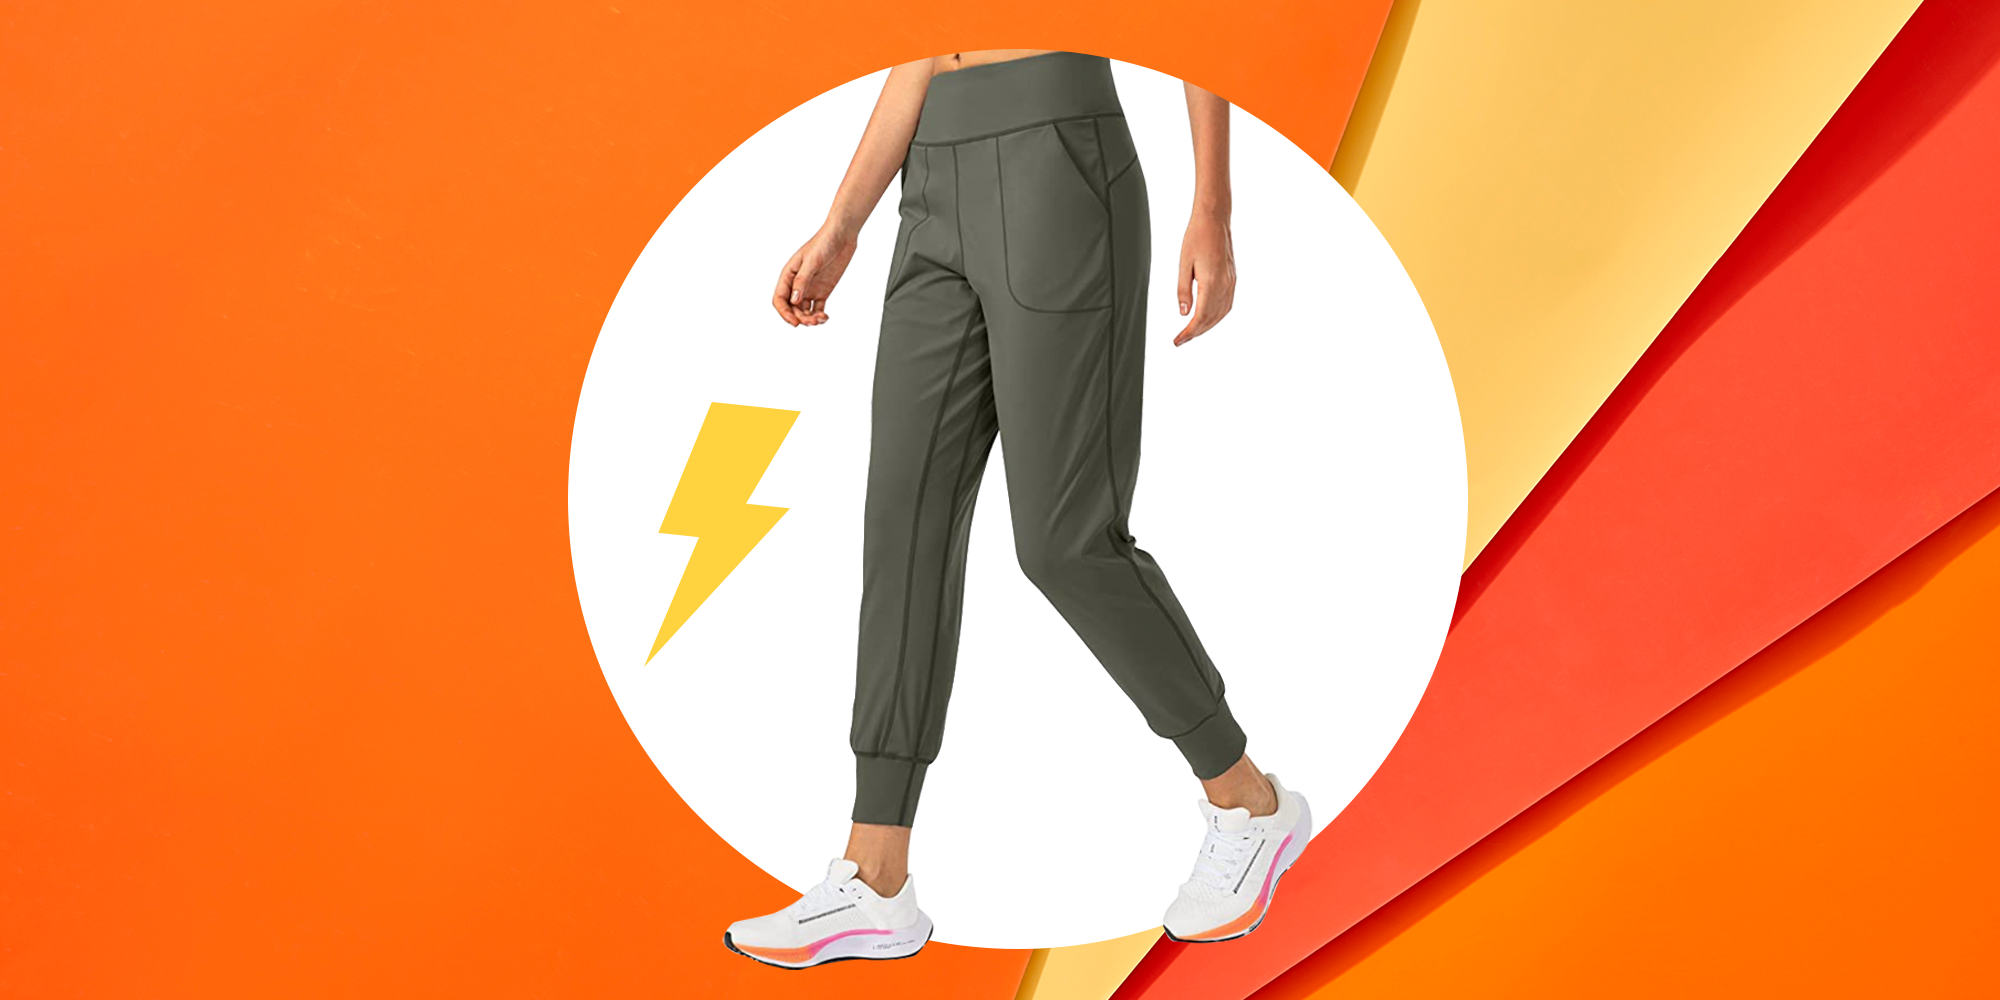 Soothfeel Women's Joggers Pants Lightweight Quick Dry Workout Athletic Track Pants for Women with Zipper Pockets 